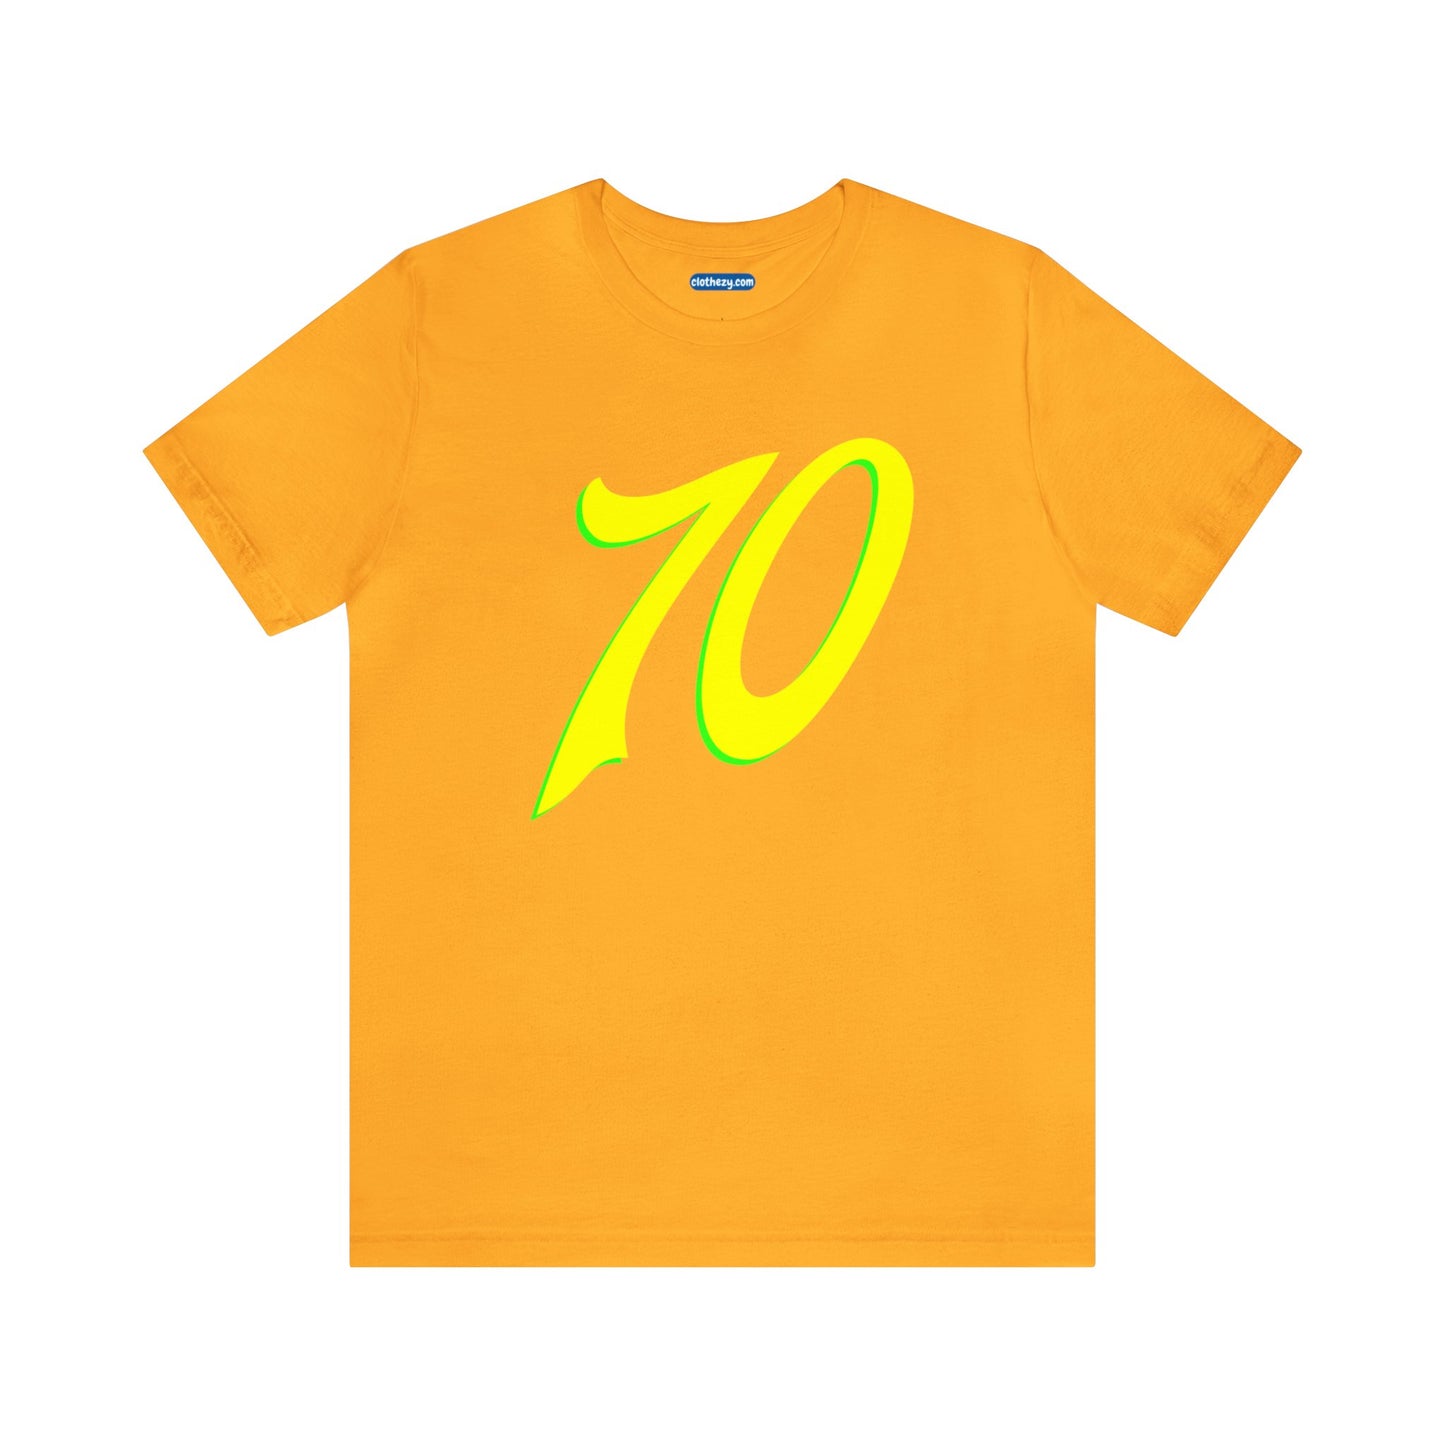 Number 70 Design - Soft Cotton Tee for birthdays and celebrations, Gift for friends and family, Multiple Options by clothezy.com in Green Heather Size Small - Buy Now